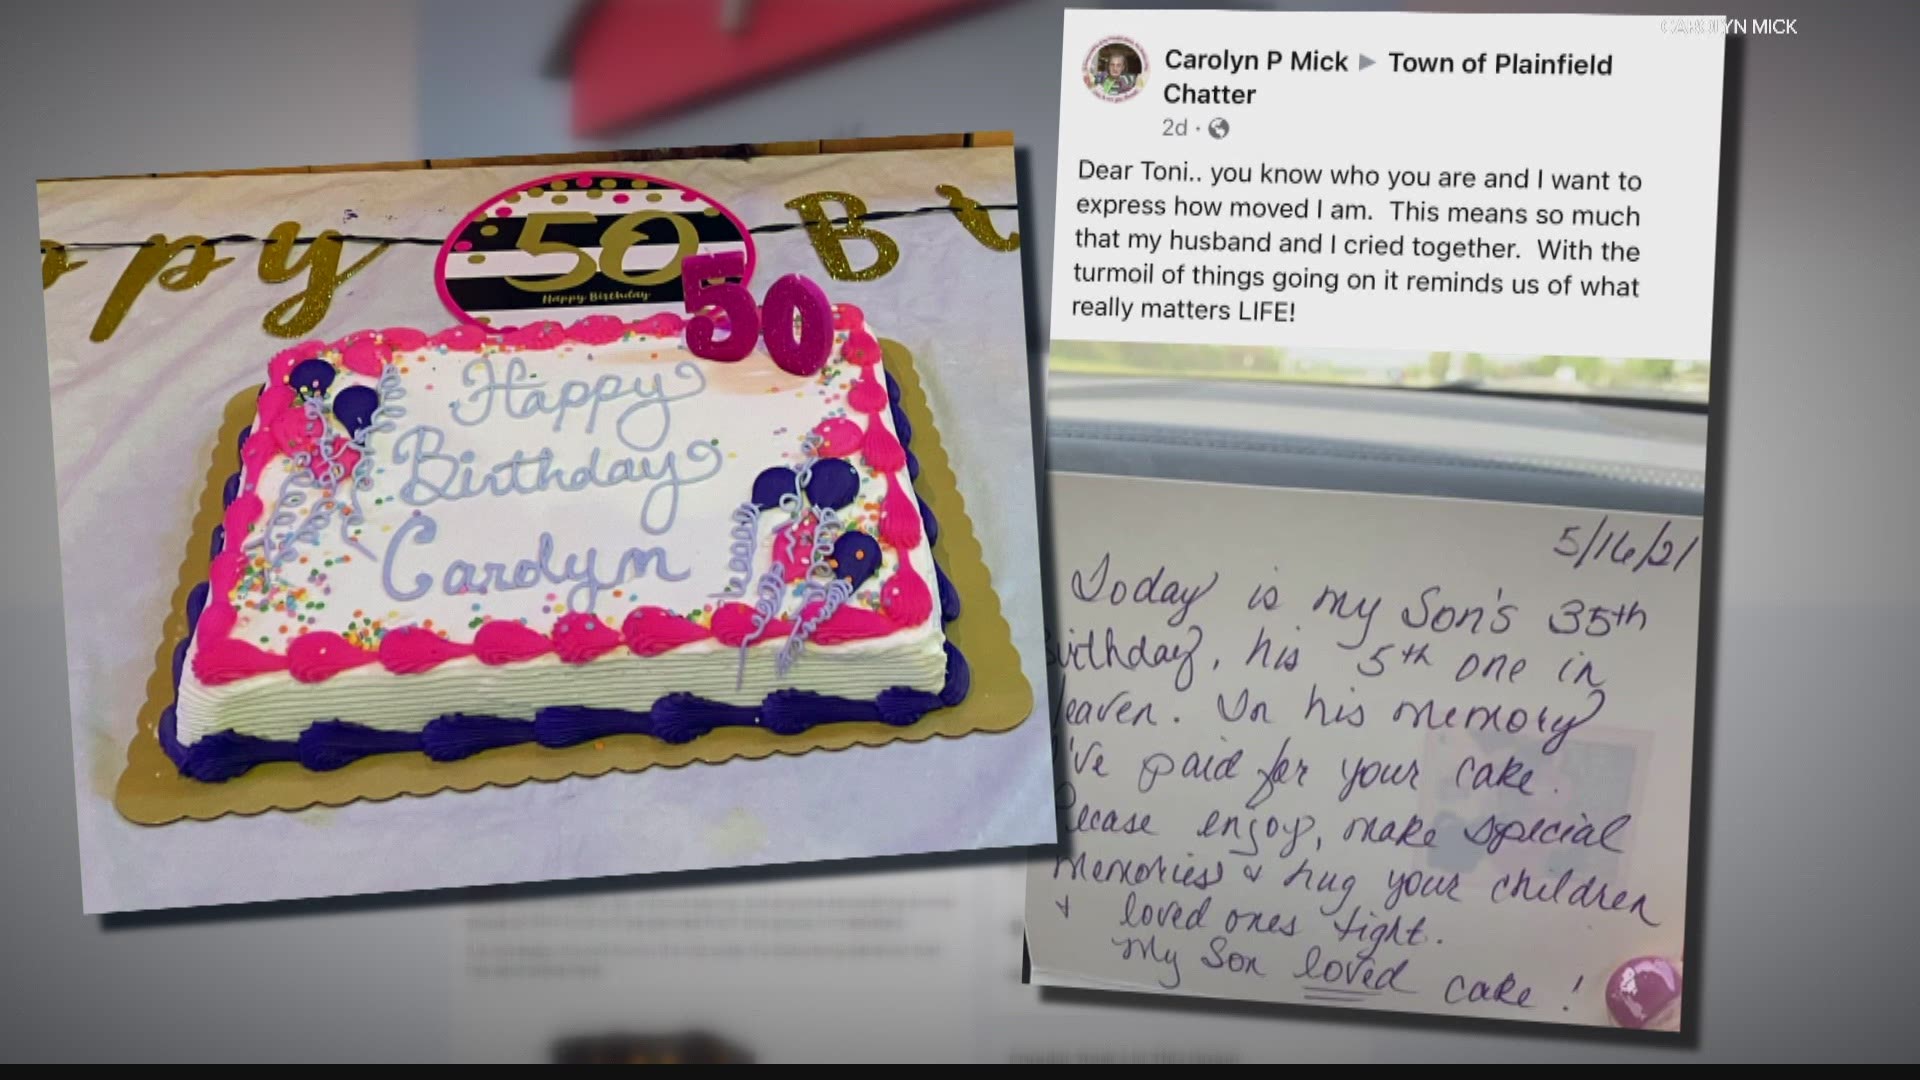 A Plainfield mom bought a cake for what would have been her son's 35th birthday. Then she decided to donate another one for someone else in his memory.